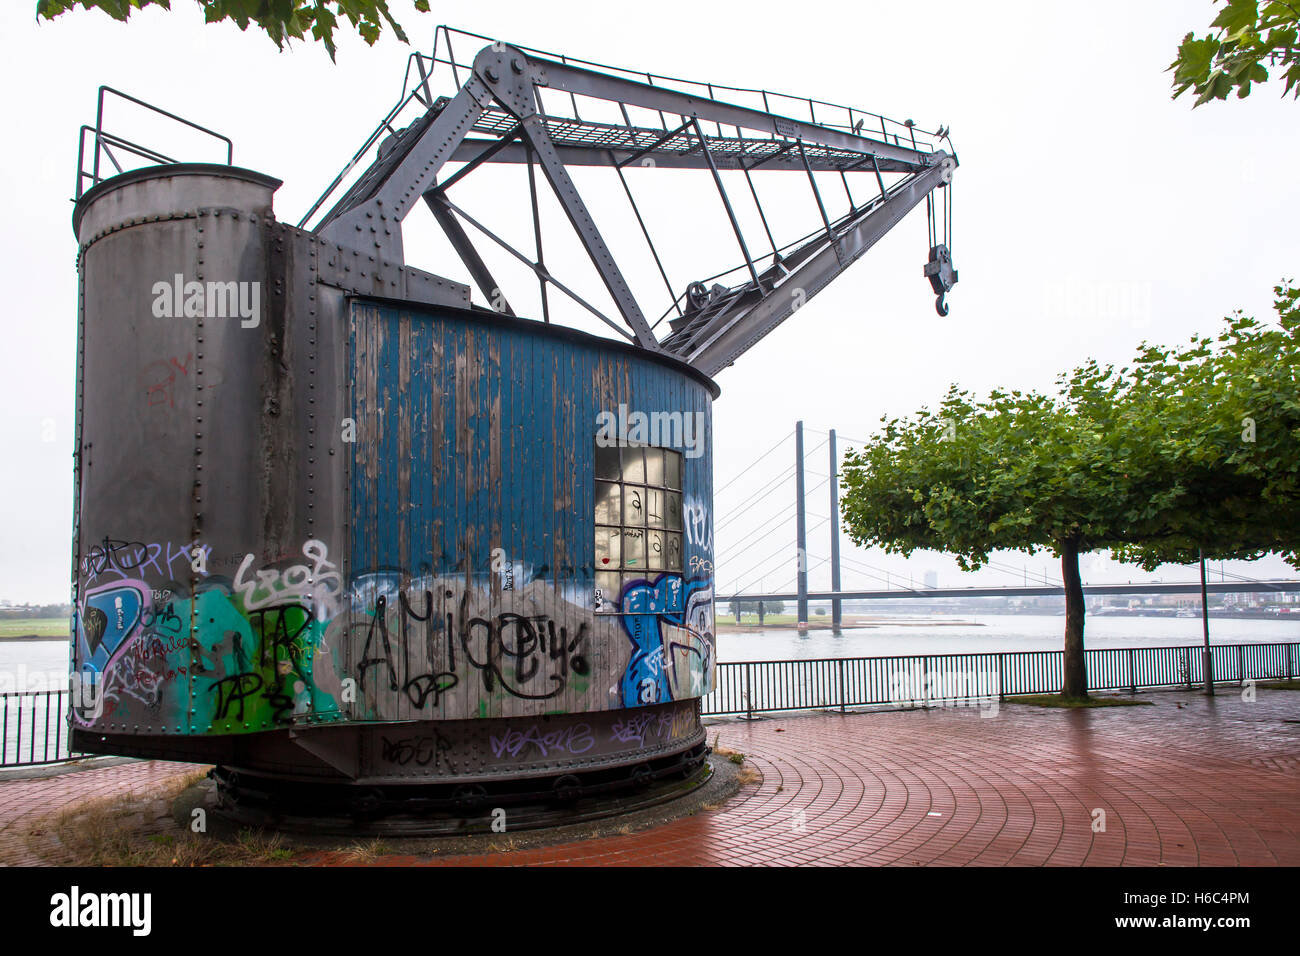 Europe, Germany, Duesseldorf, old crane on the bank of the river Rhine near the state parliament. Stock Photo